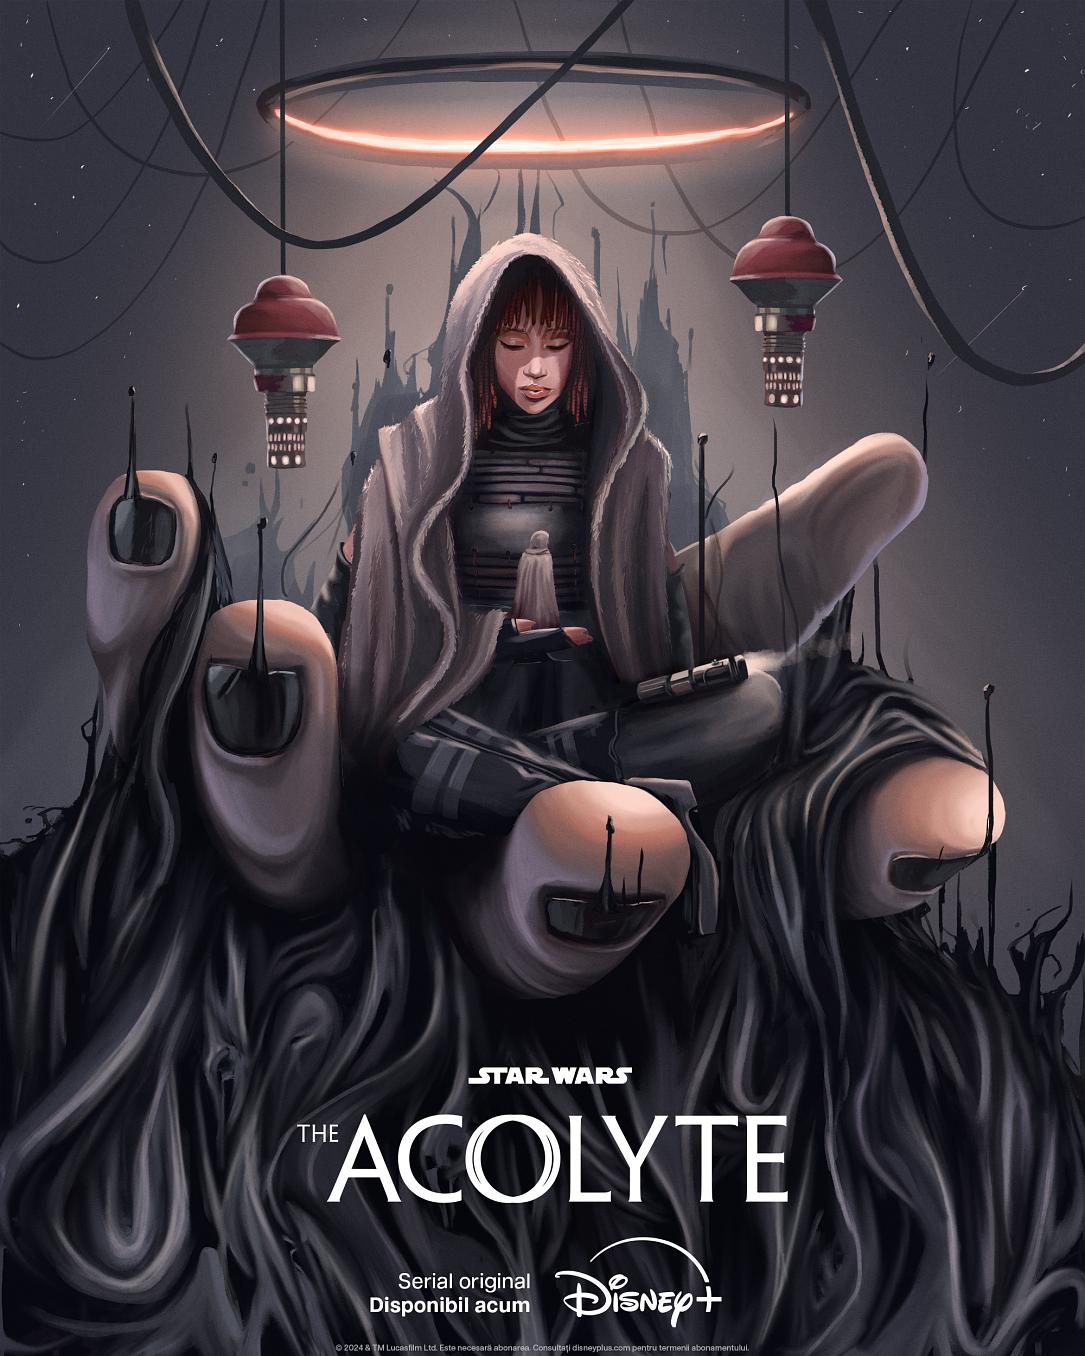 The Acolyte Teaser Hints at Key Conflicts and a Pivotal Past Crime